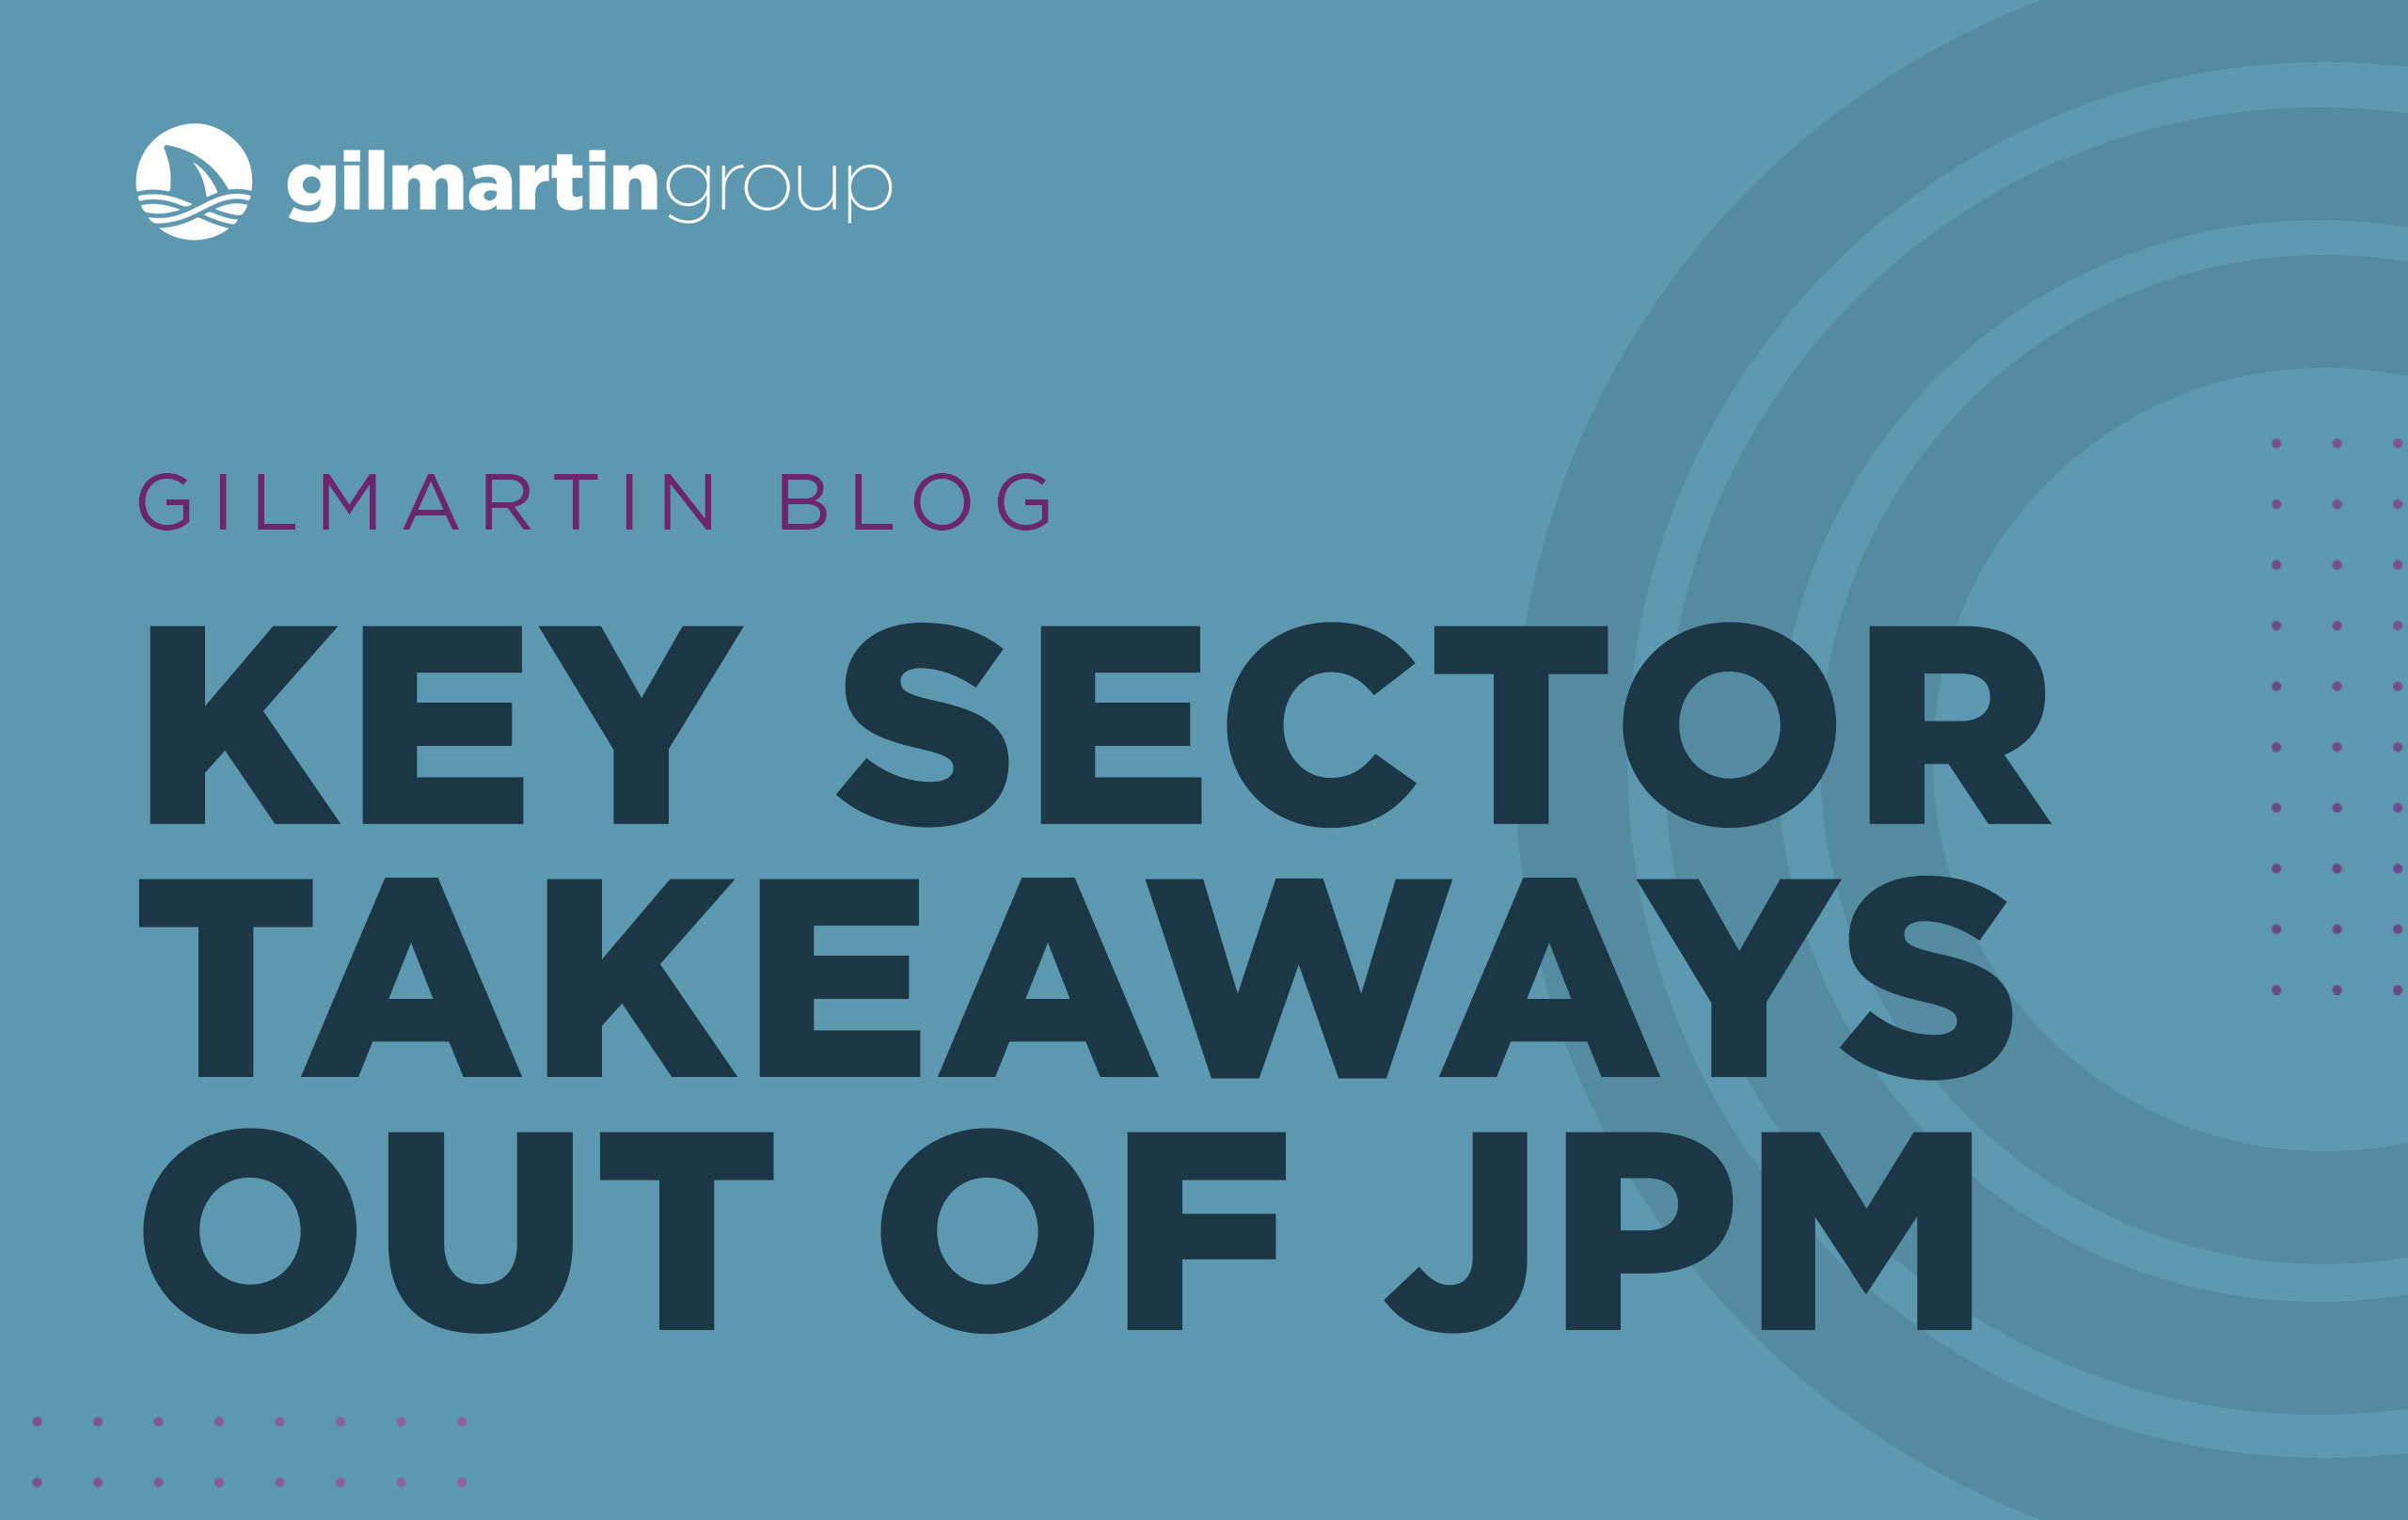 image for Key Sector Takeaways Out of JPM